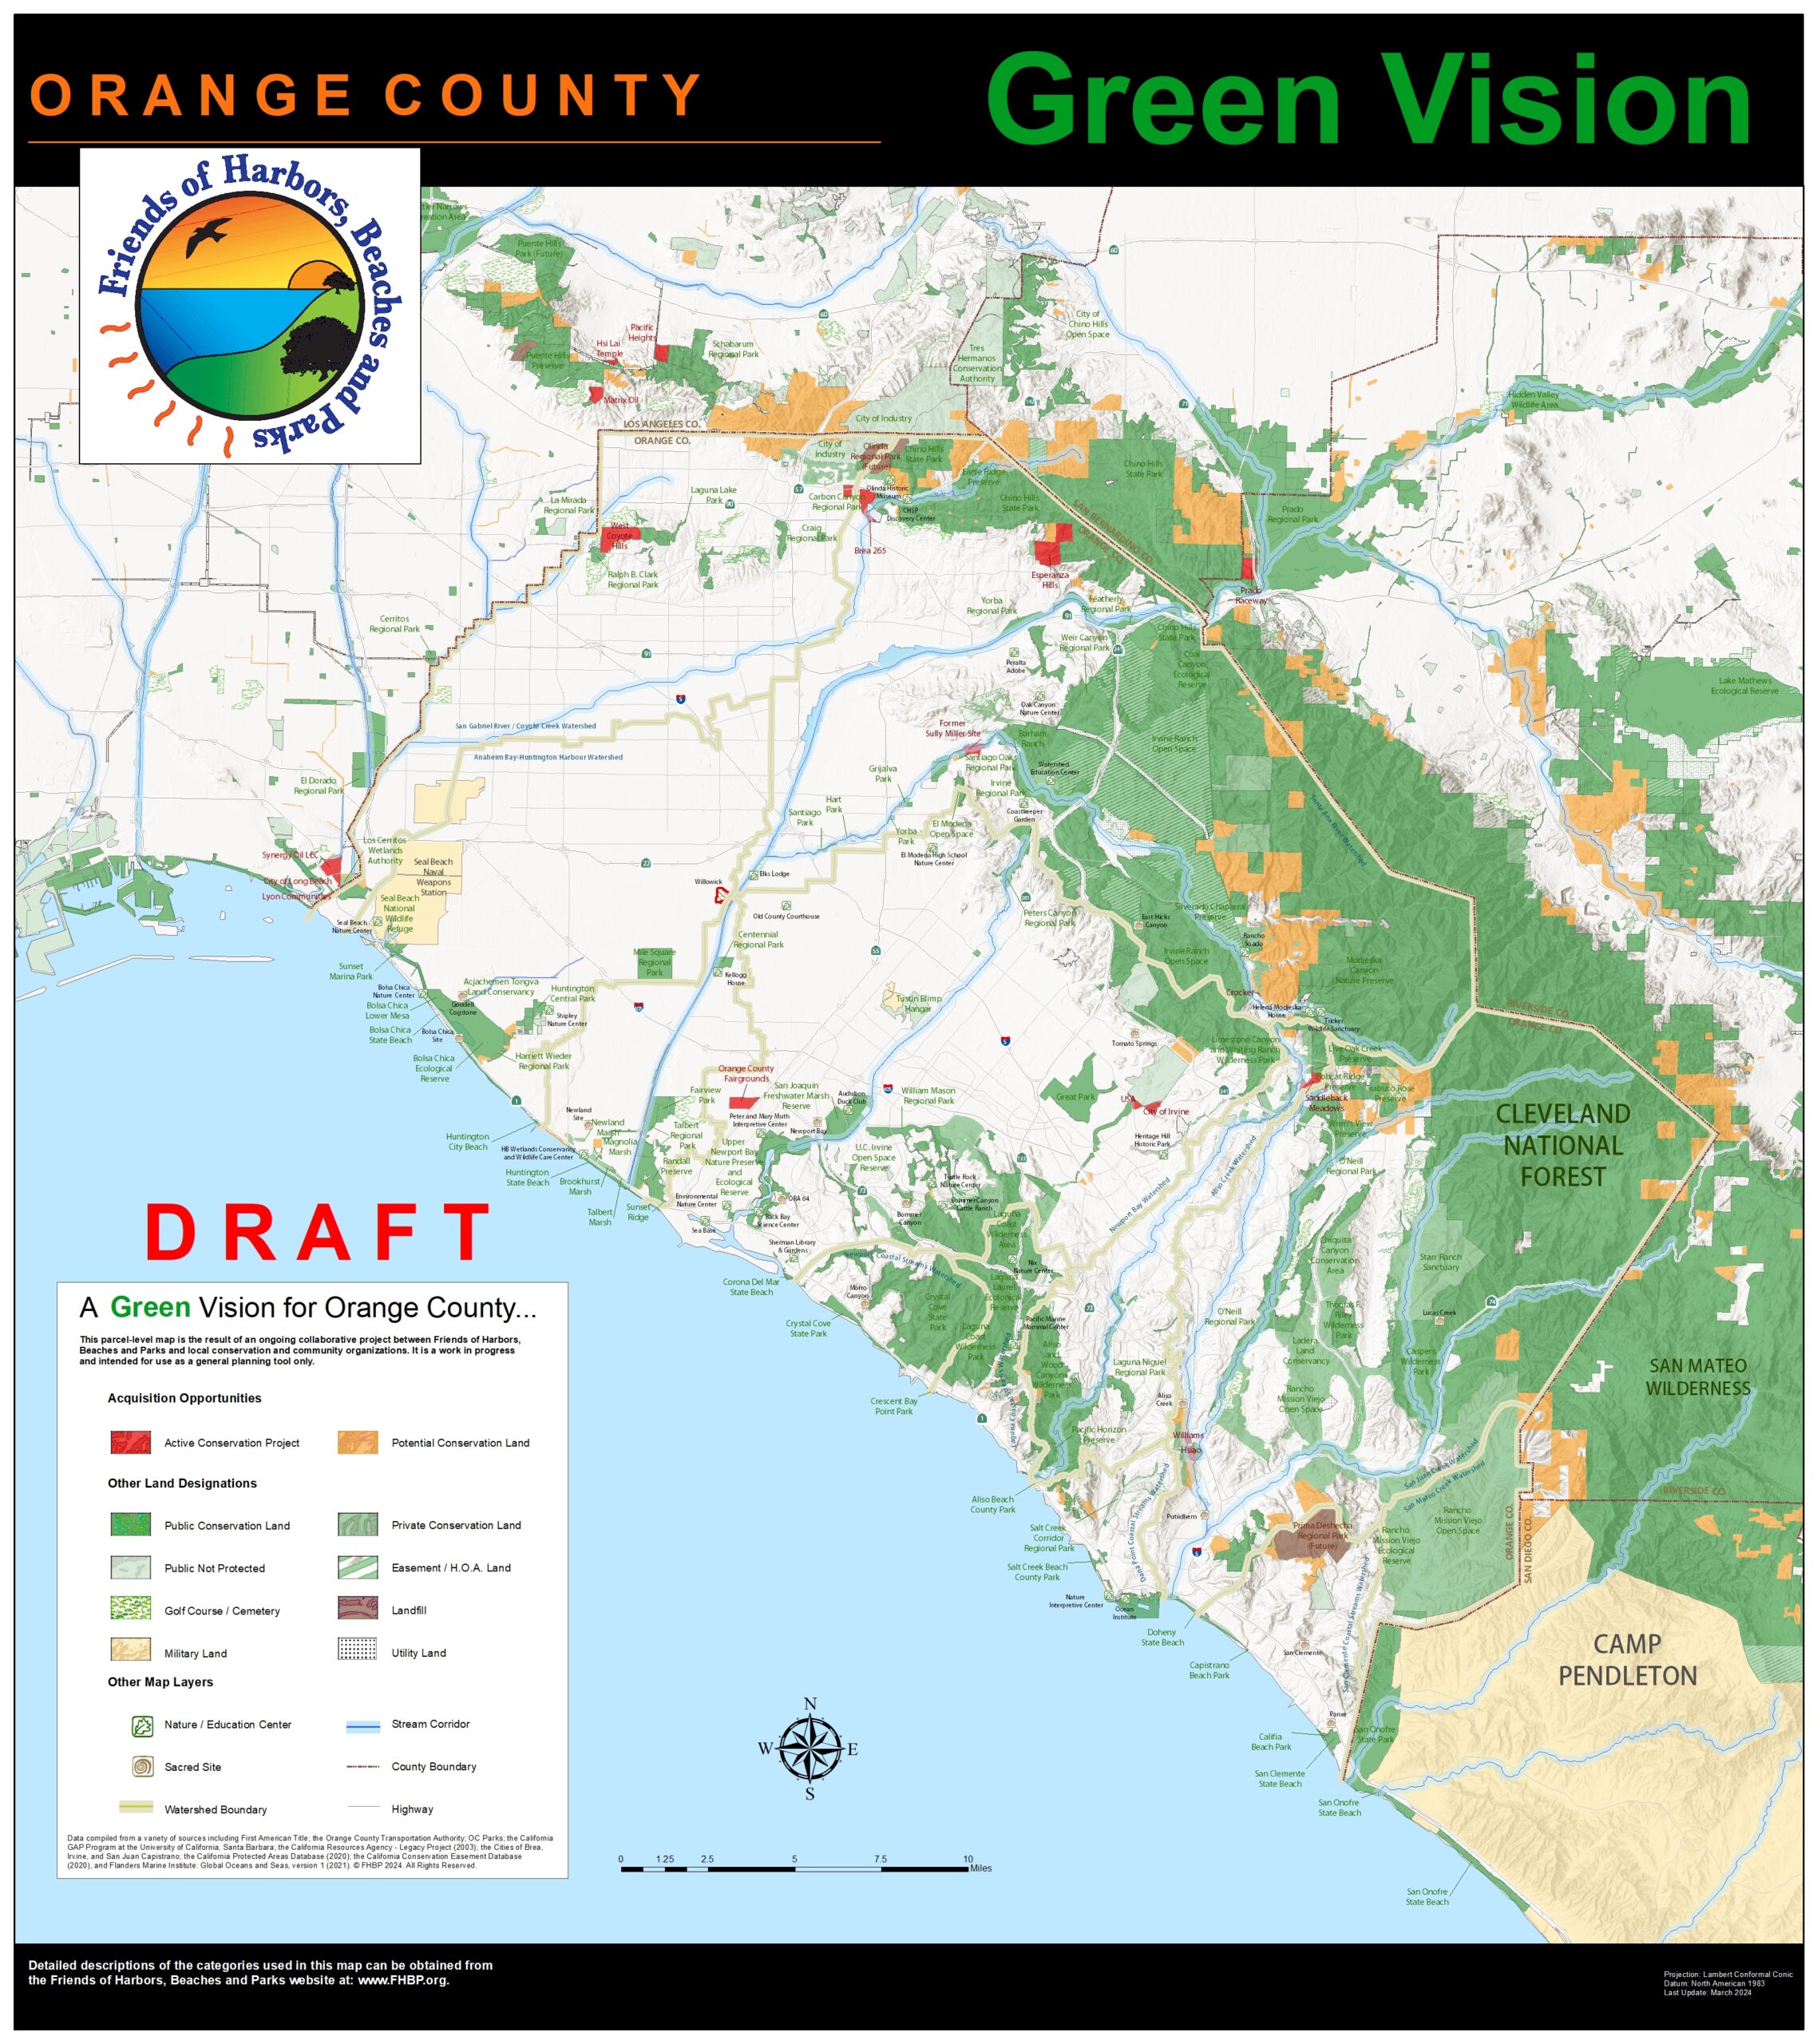 A map showing protected and unprotected lands in Orange County and neighboring counties.